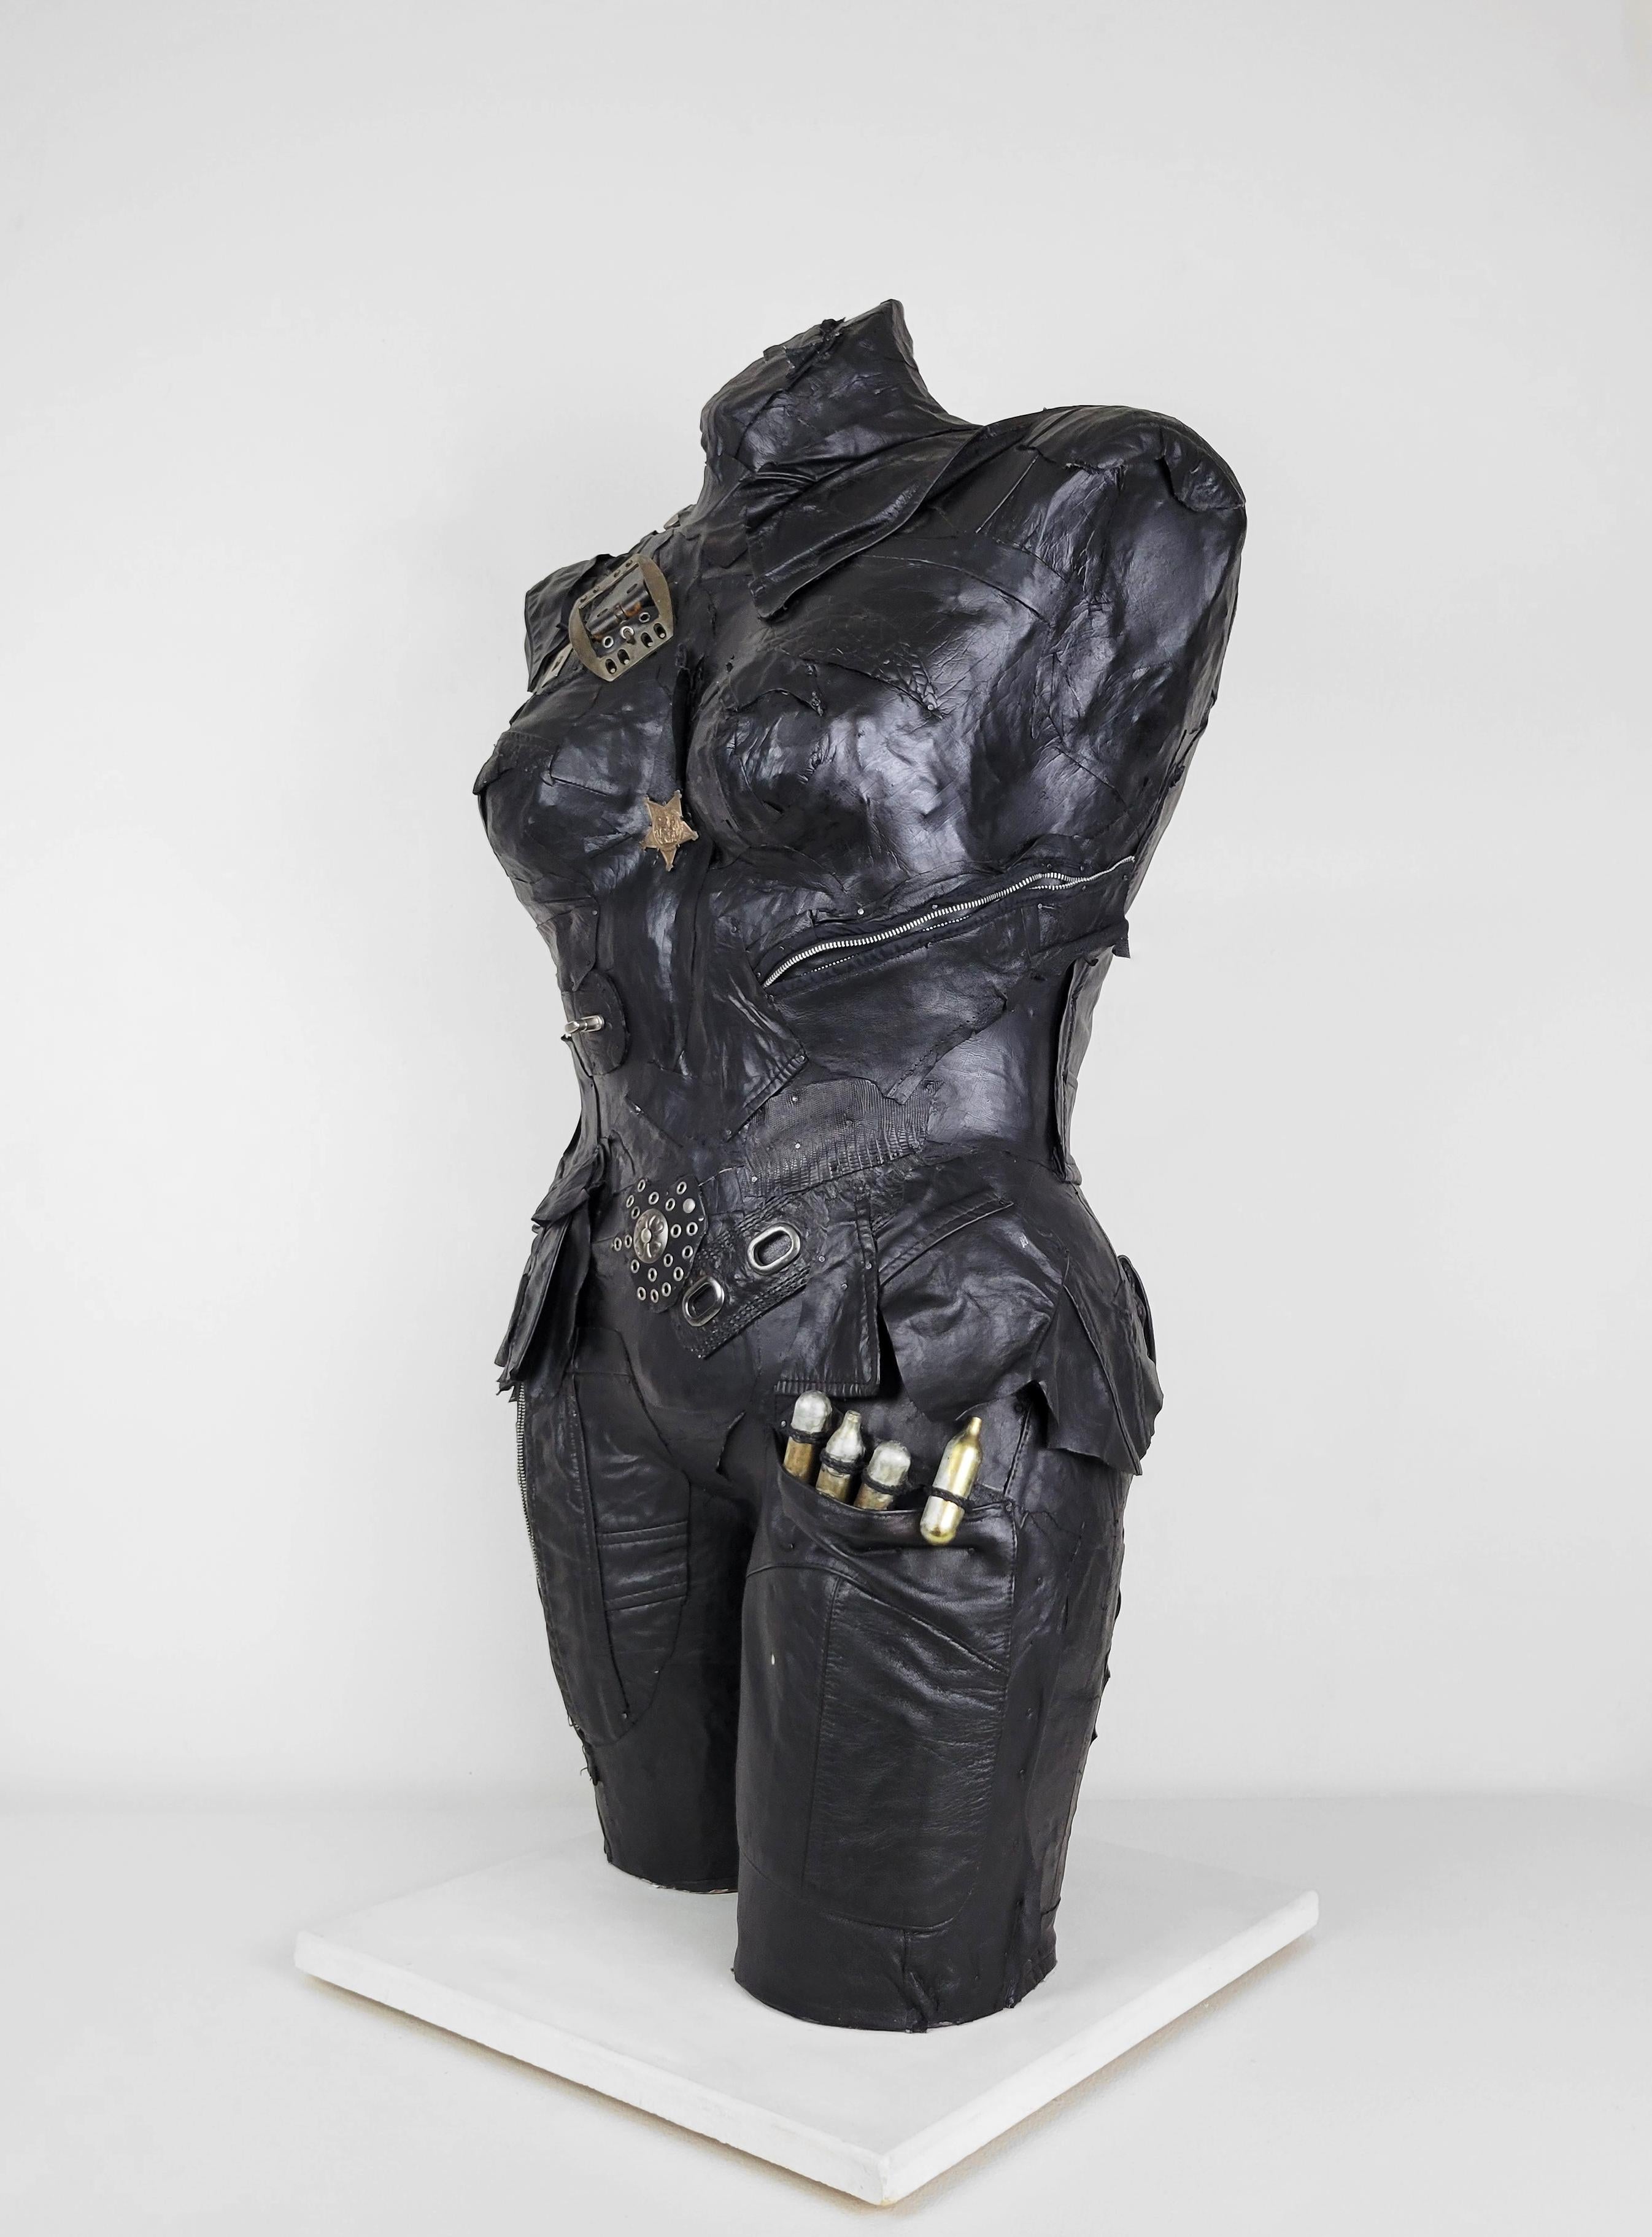 Linda Stein, In Charge 694 - Feminist Contemporary Black/Silver Leather Metal Torso Sculpture 

Starting in 2007, the artist Linda Stein began to explore gender multiplicities and diversities in her sculptural series The Fluidity of Gender.  The